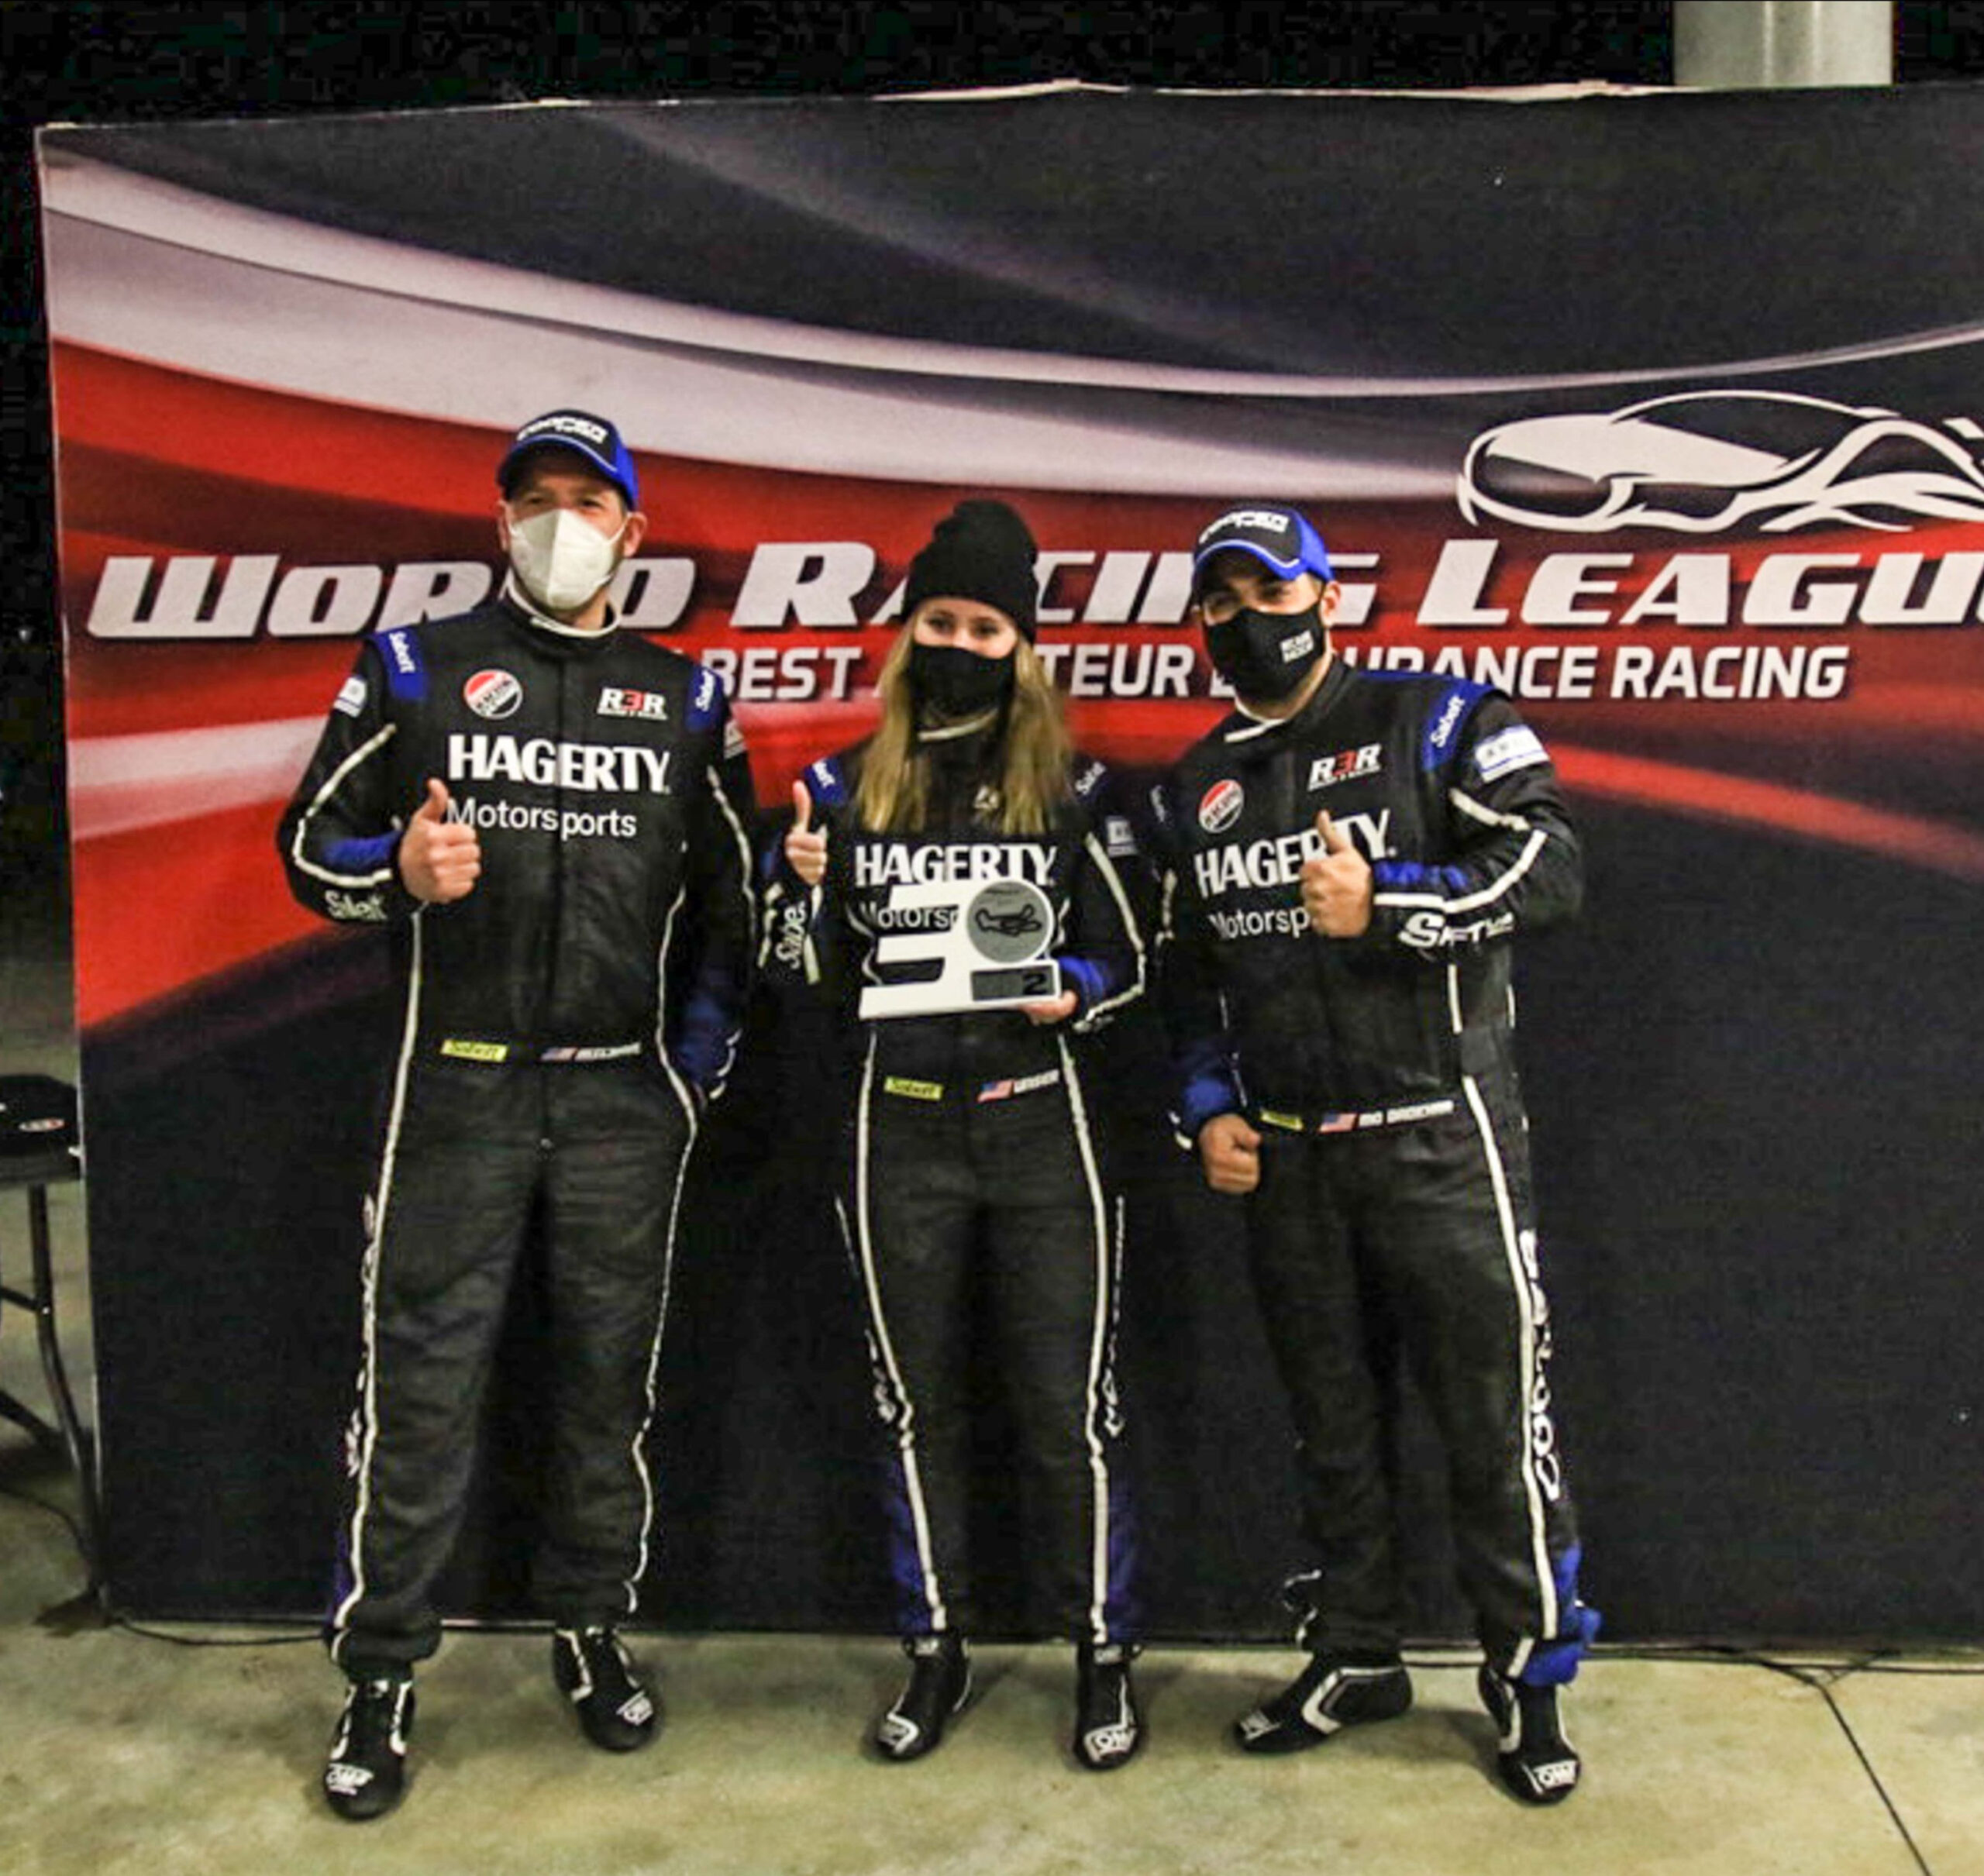 Podium Finish for Round 3 Racing in Dramatic Barber Endurance Race